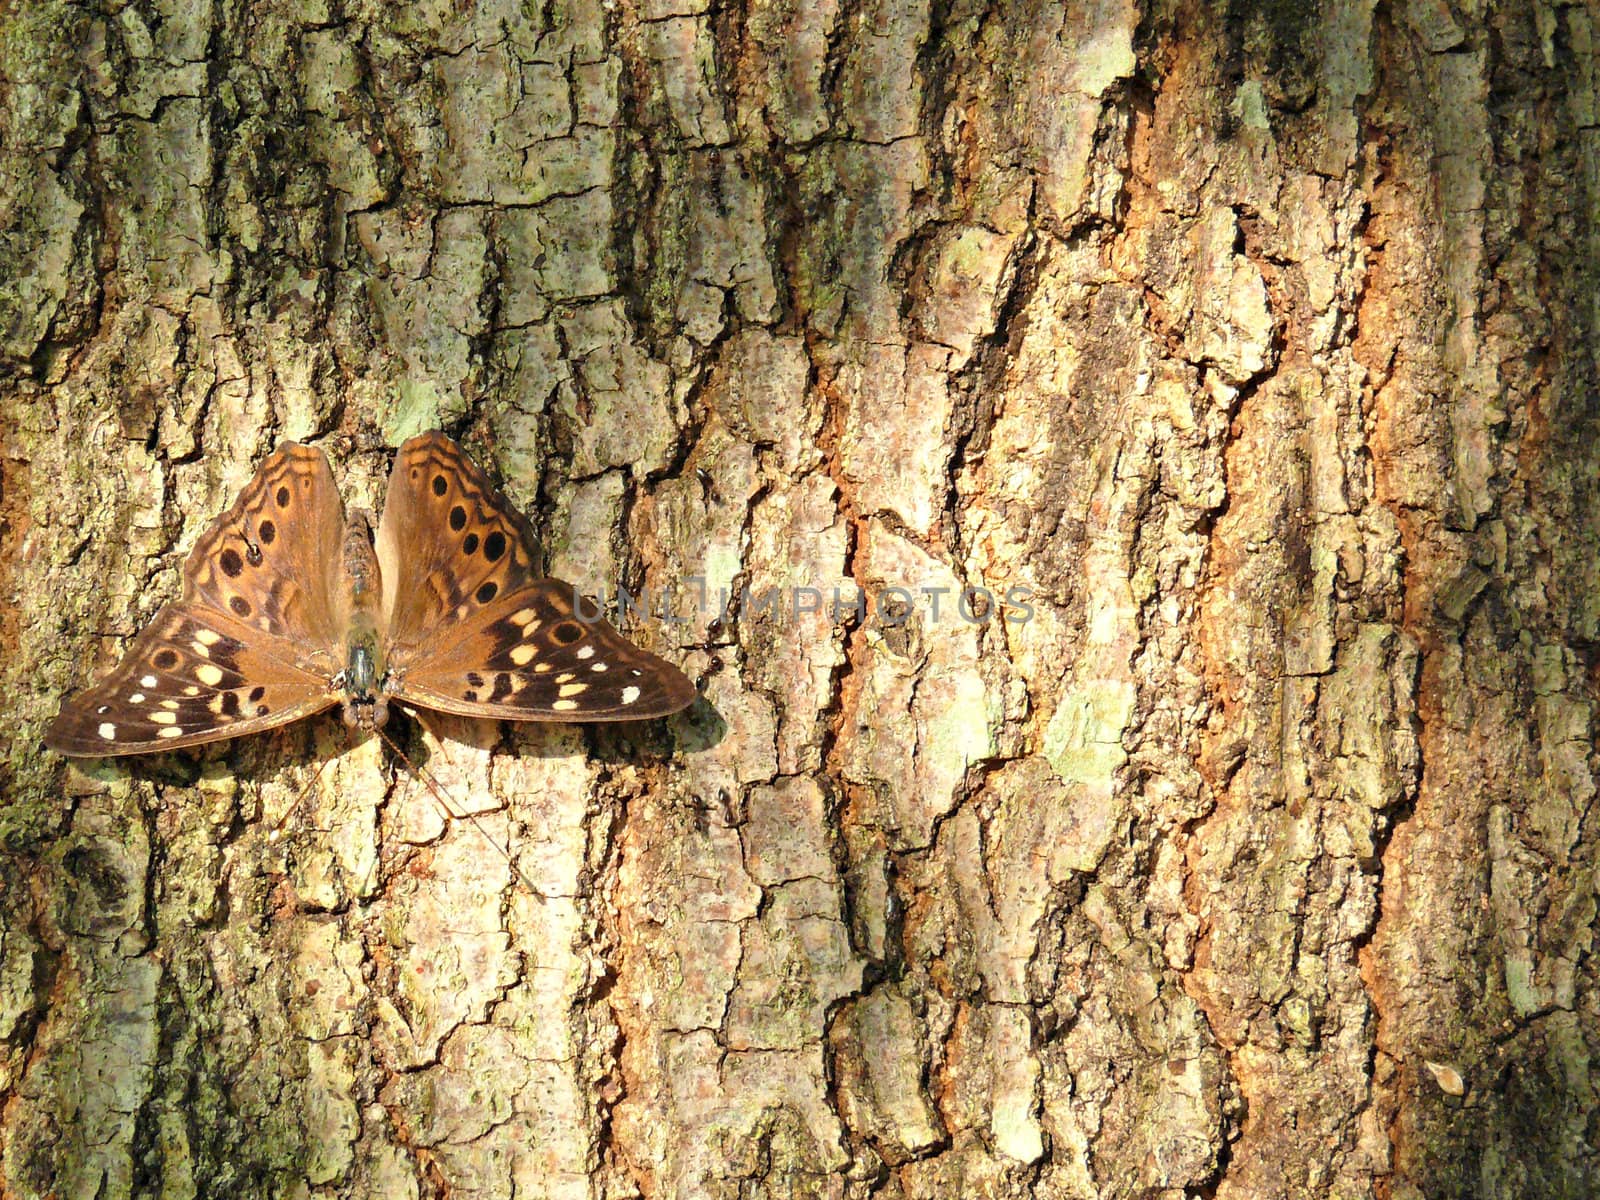 A Brown Monark Bbutterfly on the trunk of a tree